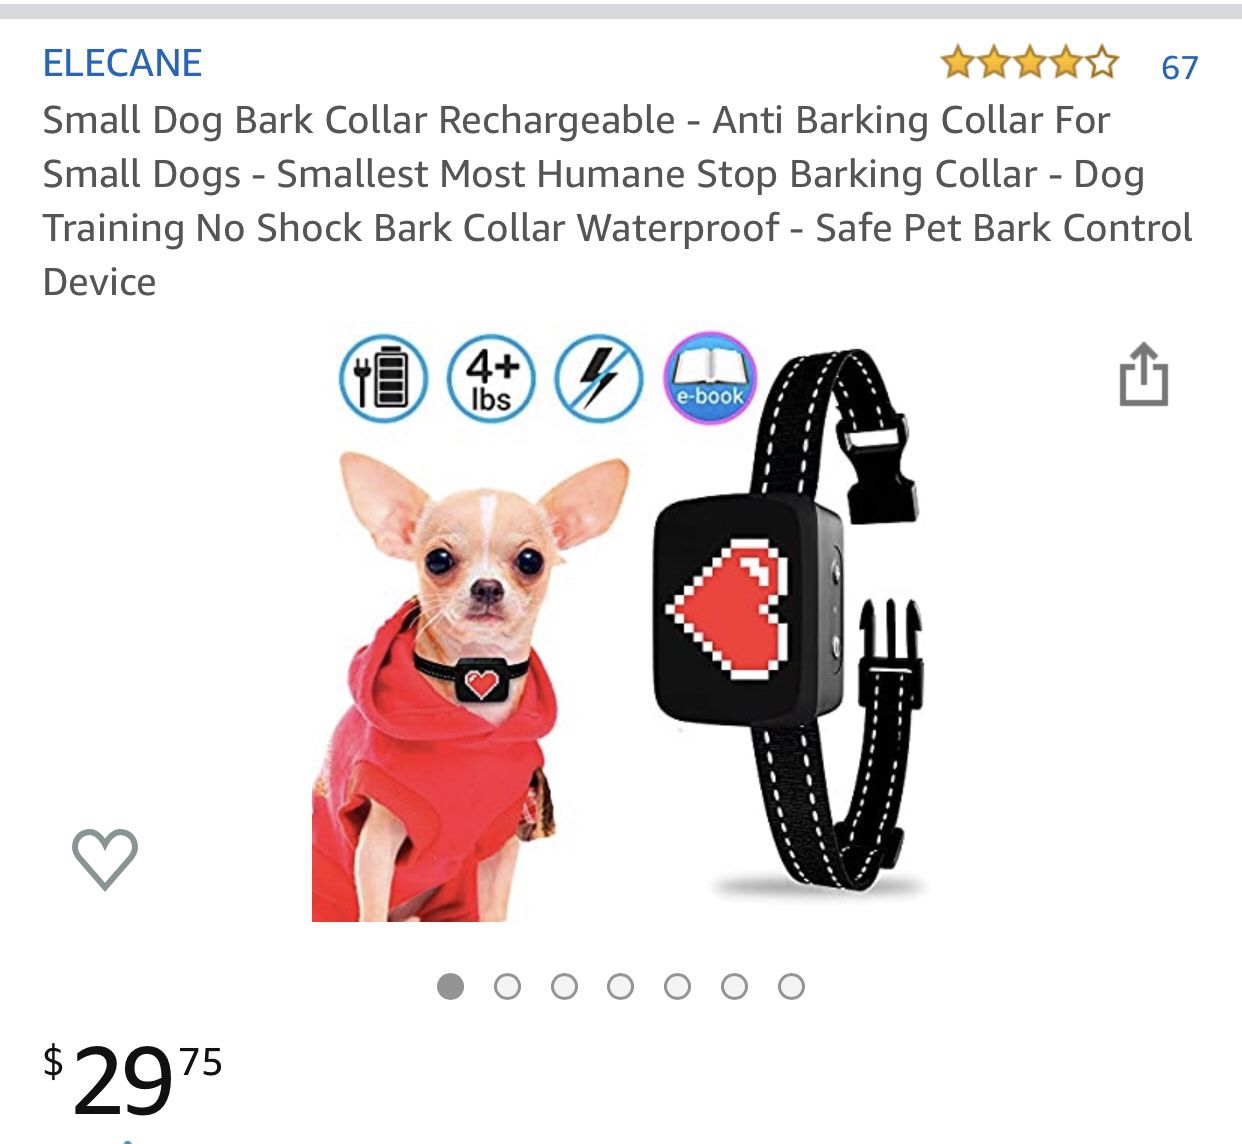 Small Dog Bark Collar Rechargeable - Anti Barking Collar For Small Dogs - Smallest Most Humane Stop Barking Collar - Dog Training No Shock Bark Colla